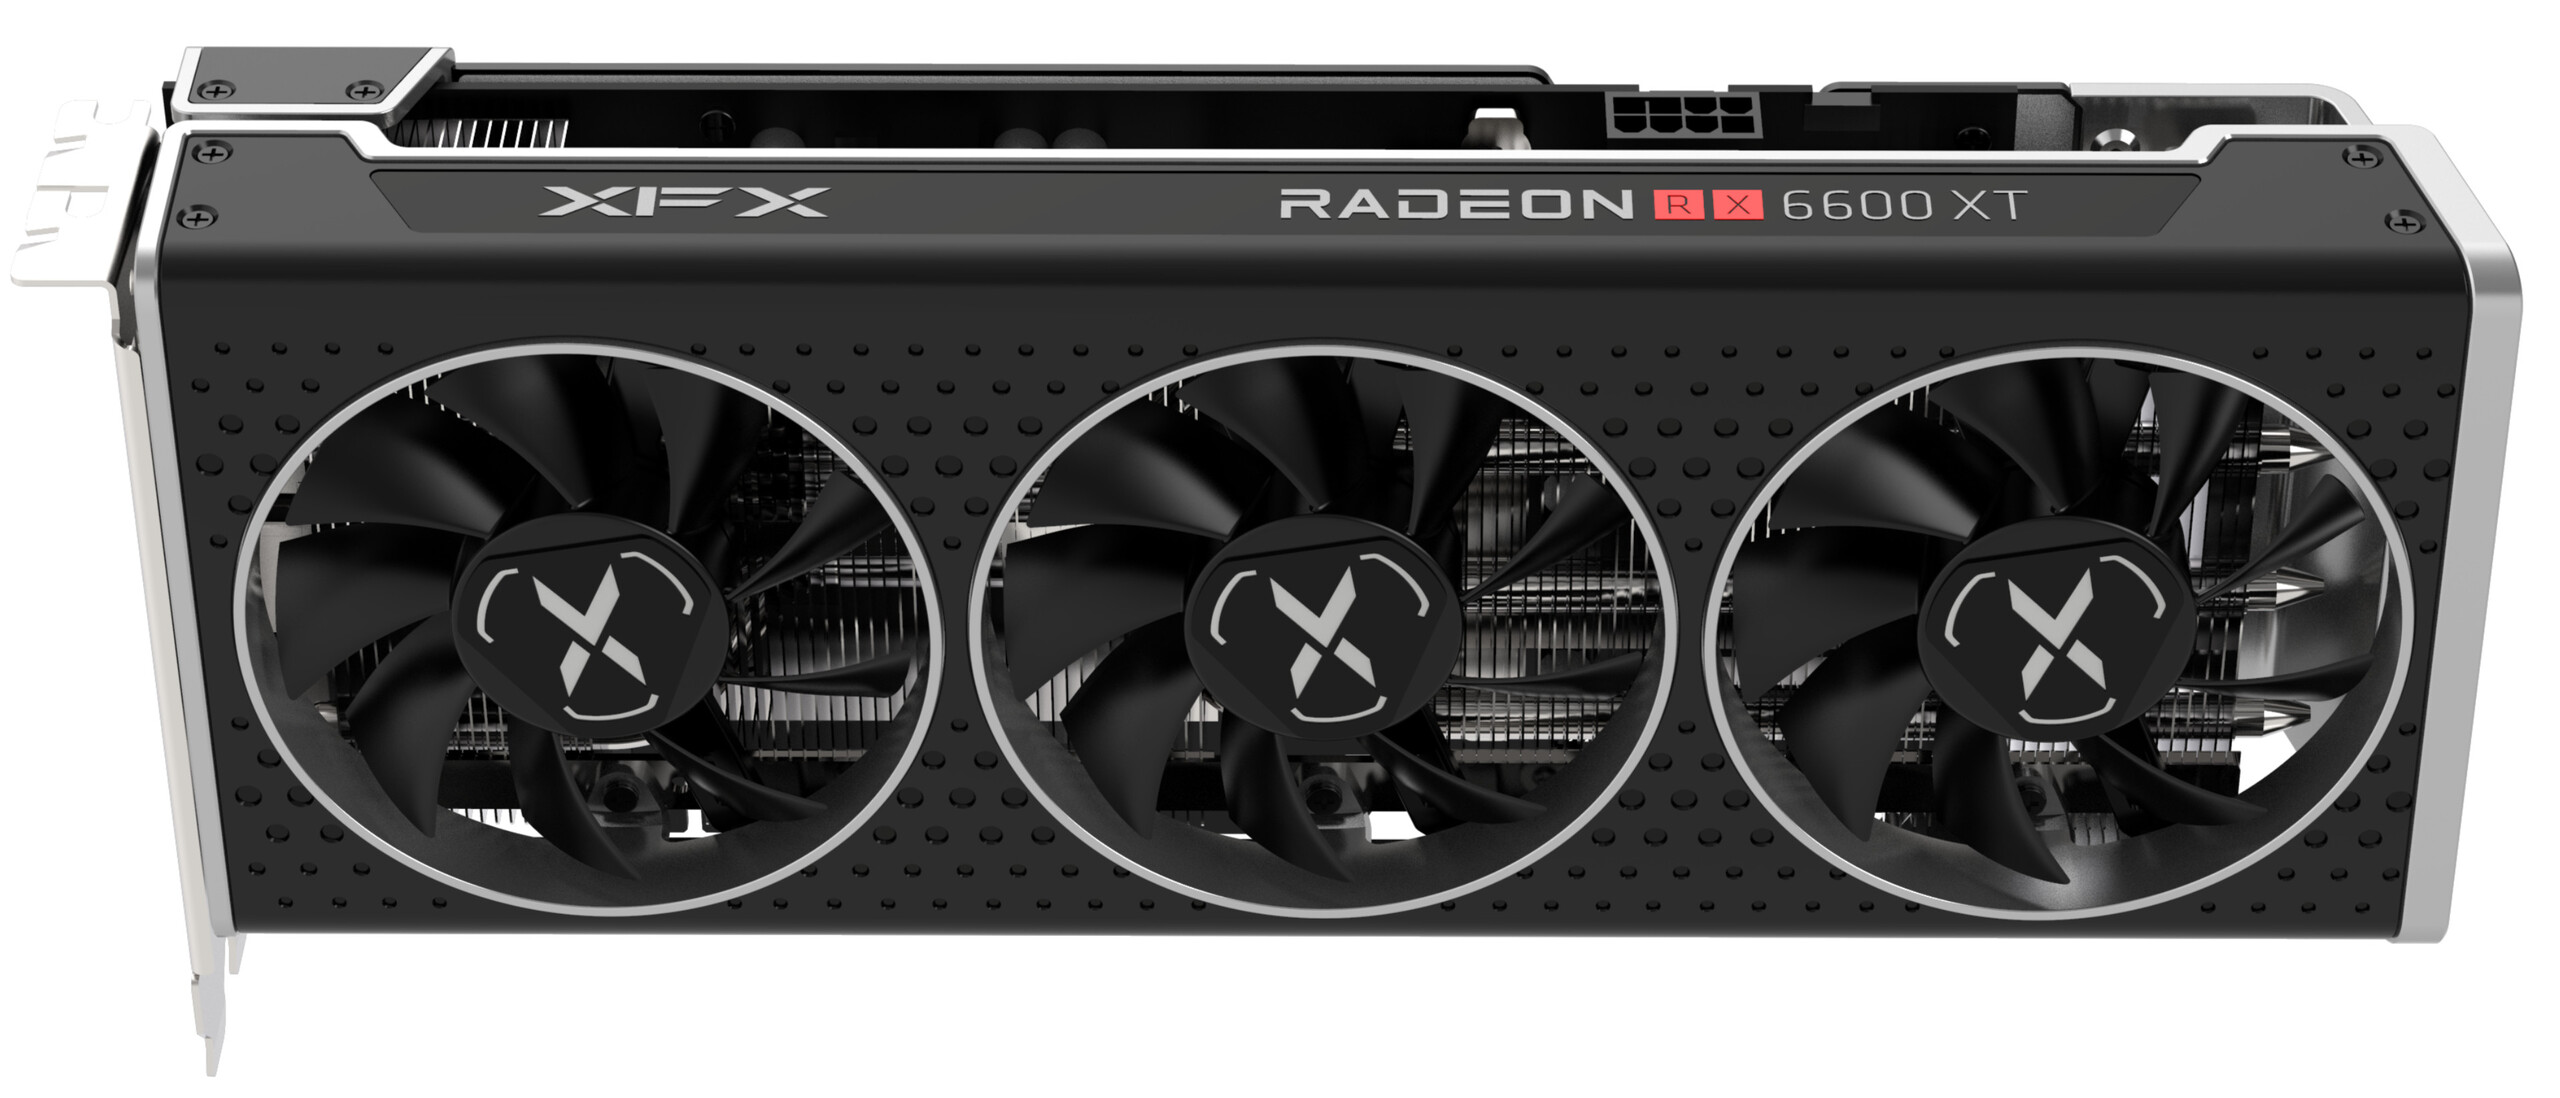 AMD RX 6600 XT GPU tested: Fast performer for 1080p gaming - CNET